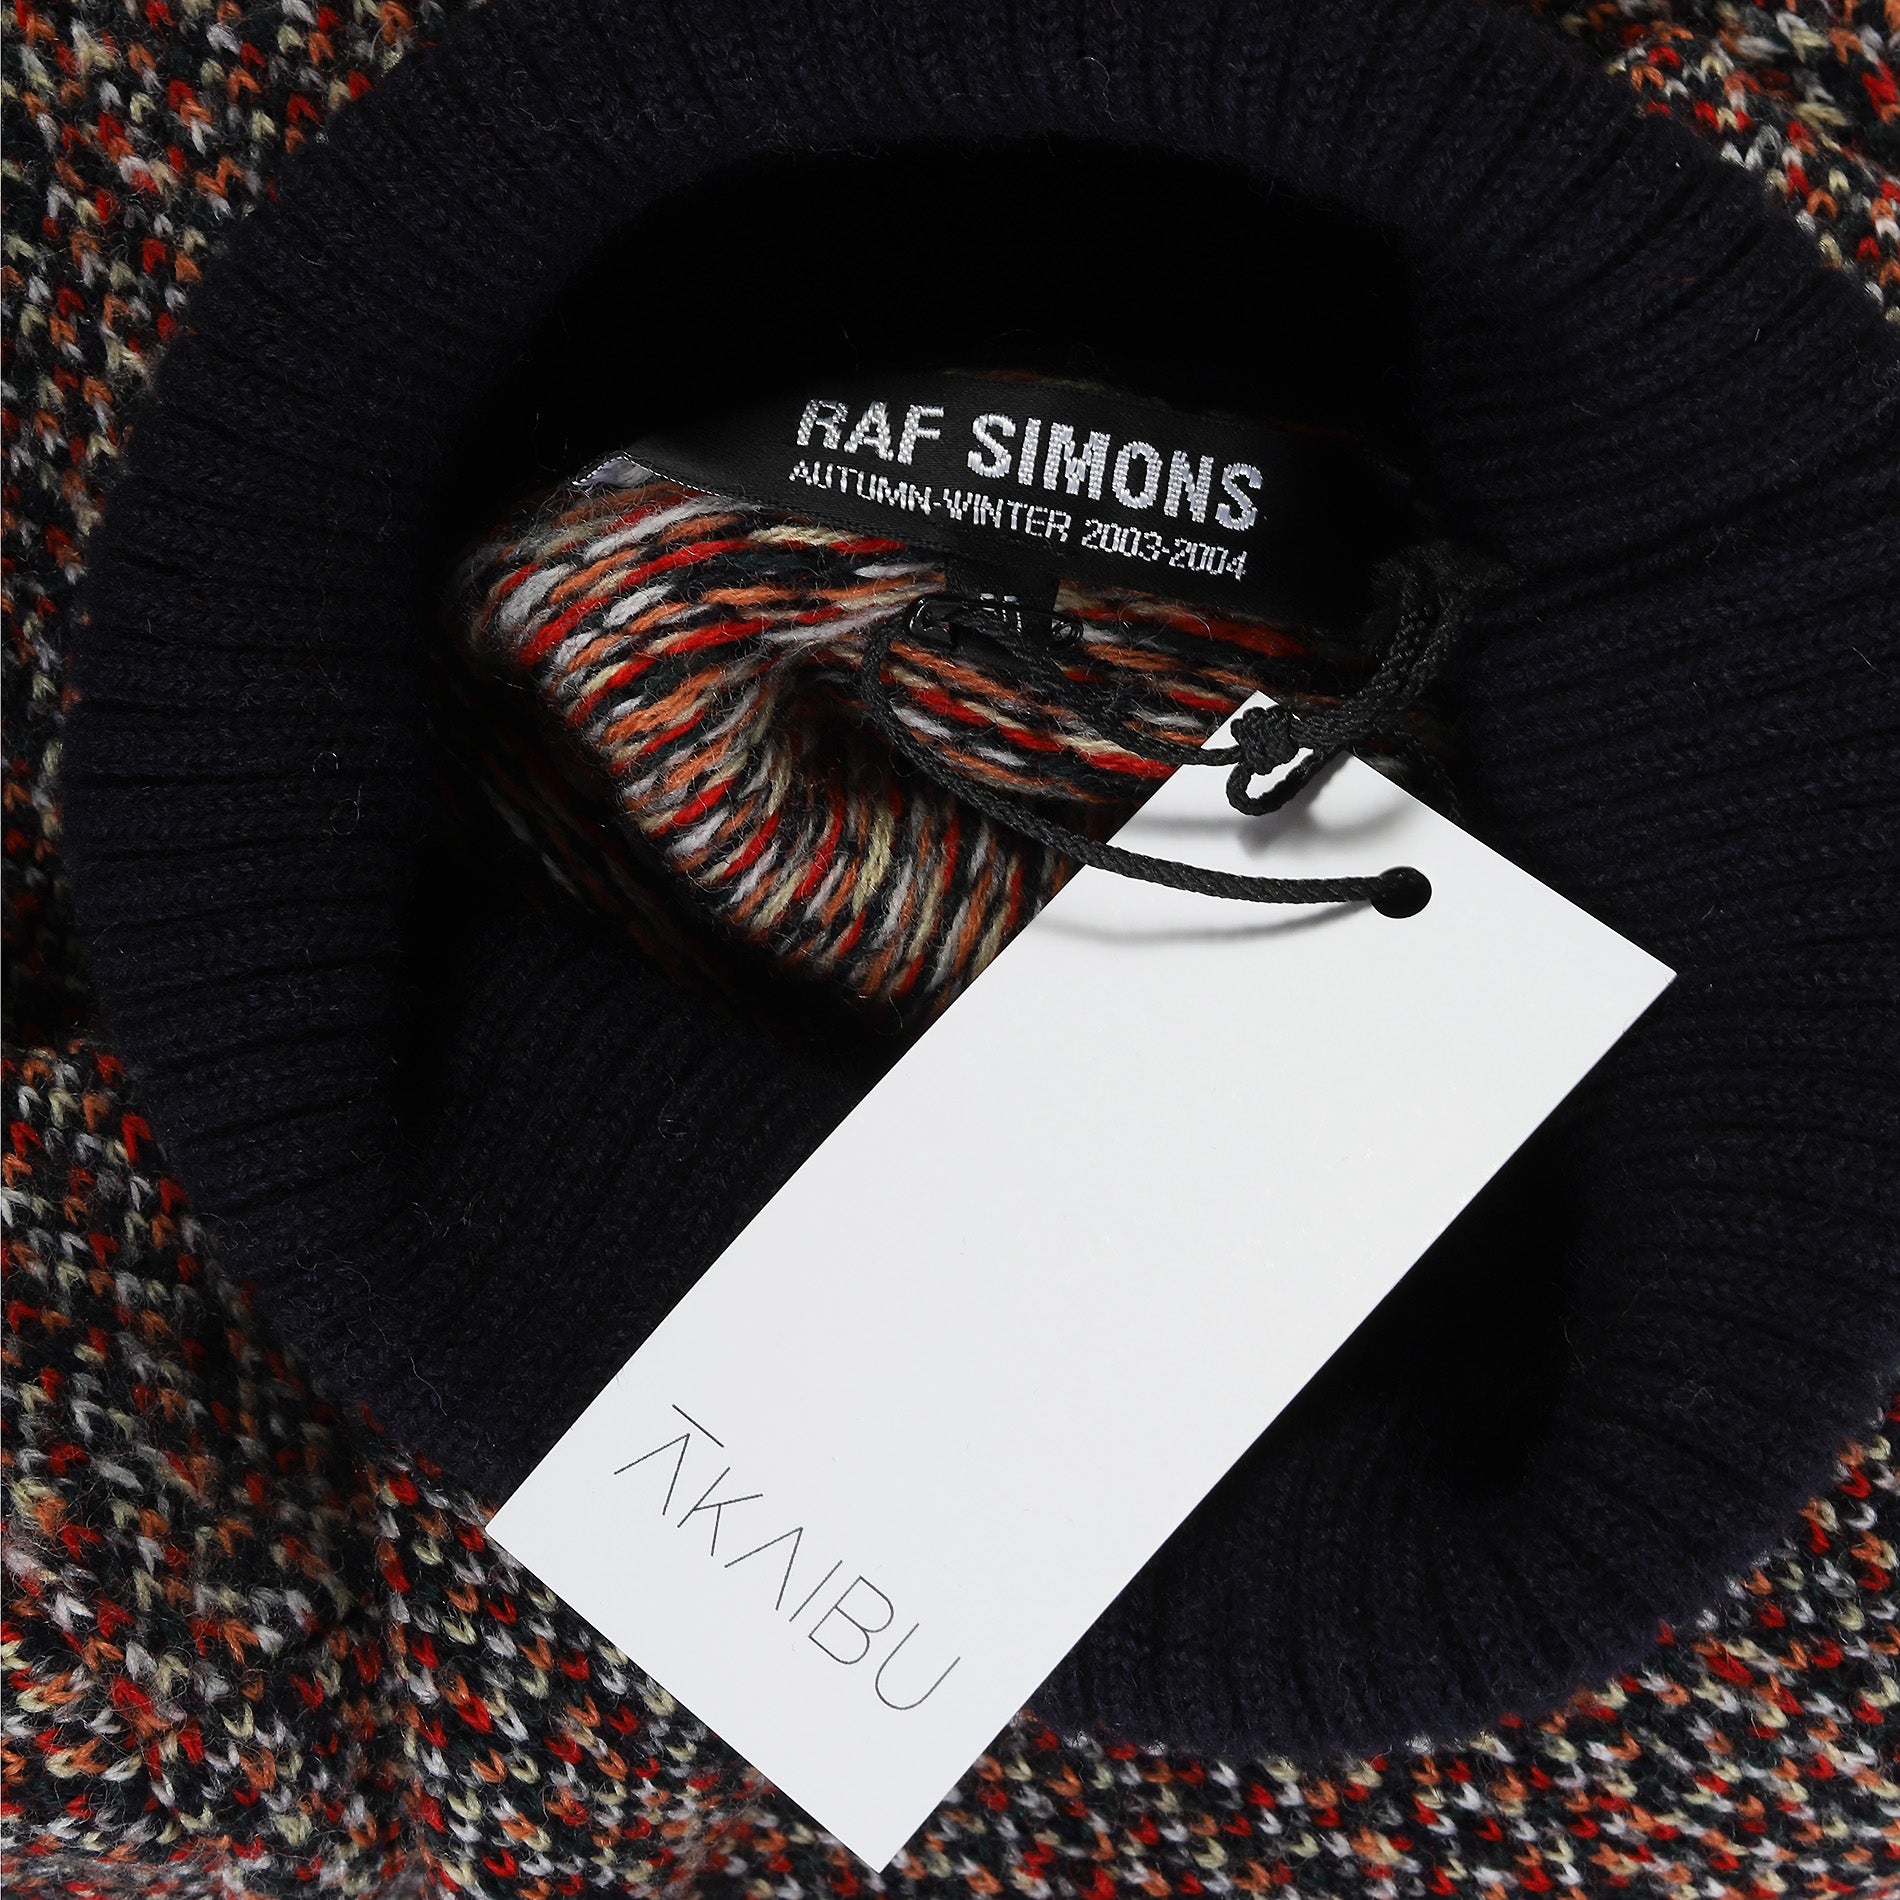 Raf Simons AW2003 Closer Multicolor Turtle Neck Knit Sweater